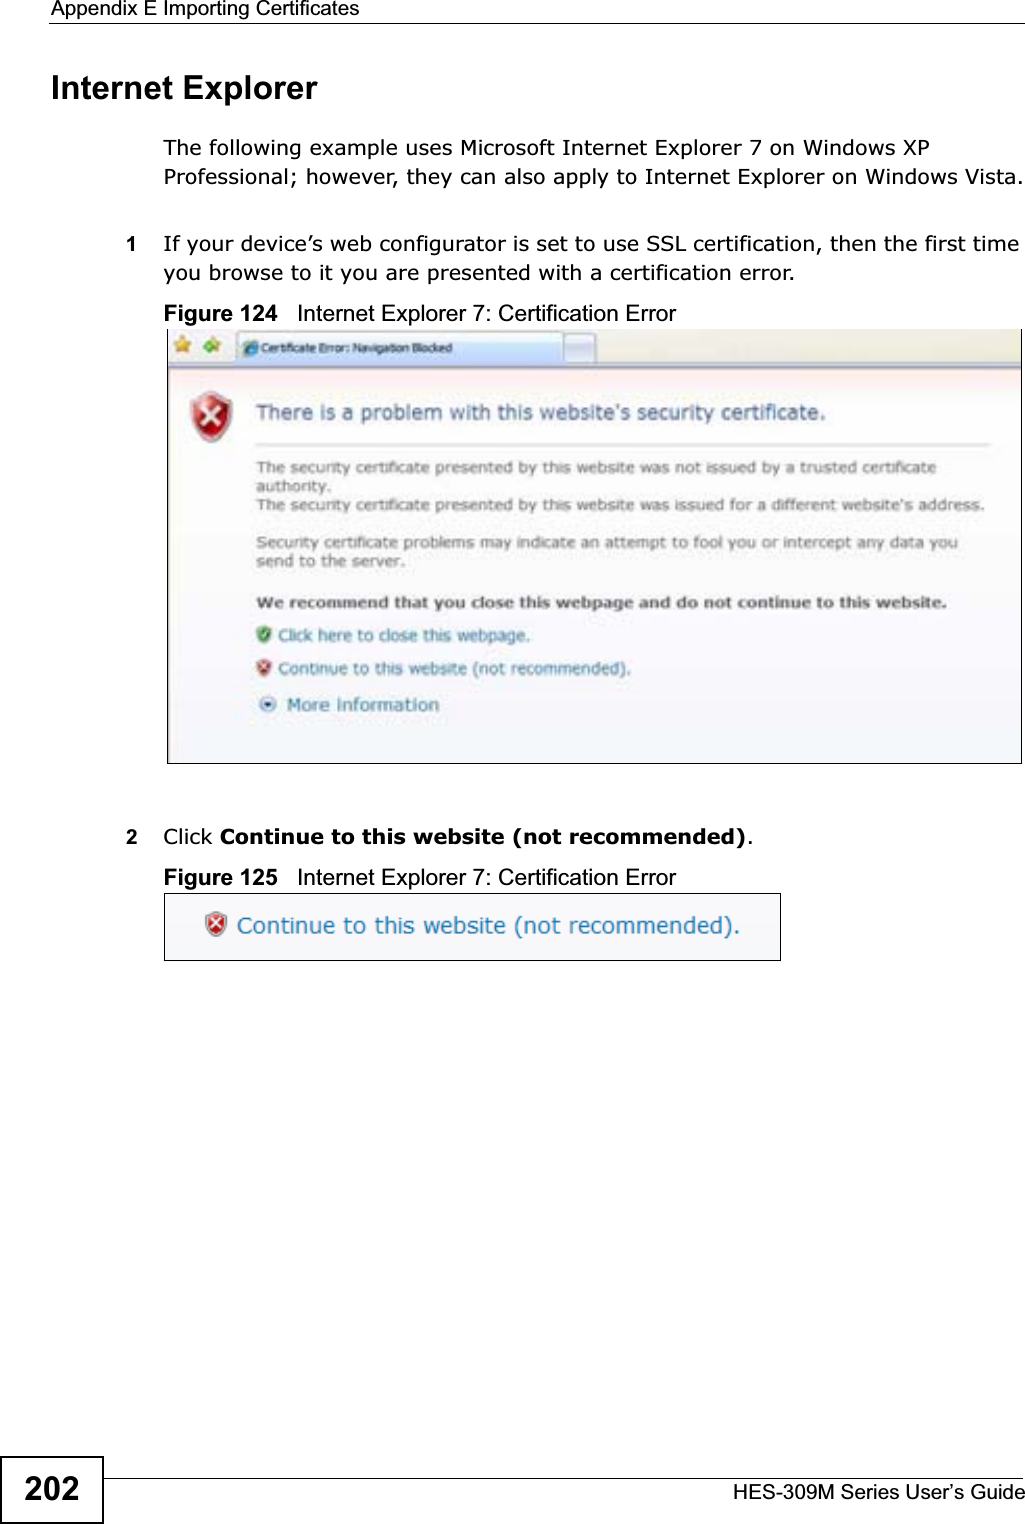 Appendix E Importing CertificatesHES-309M Series User’s Guide202Internet ExplorerThe following example uses Microsoft Internet Explorer 7 on Windows XP Professional; however, they can also apply to Internet Explorer on Windows Vista.1If your device’s web configurator is set to use SSL certification, then the first time you browse to it you are presented with a certification error.Figure 124   Internet Explorer 7: Certification Error2Click Continue to this website (not recommended).Figure 125   Internet Explorer 7: Certification Error